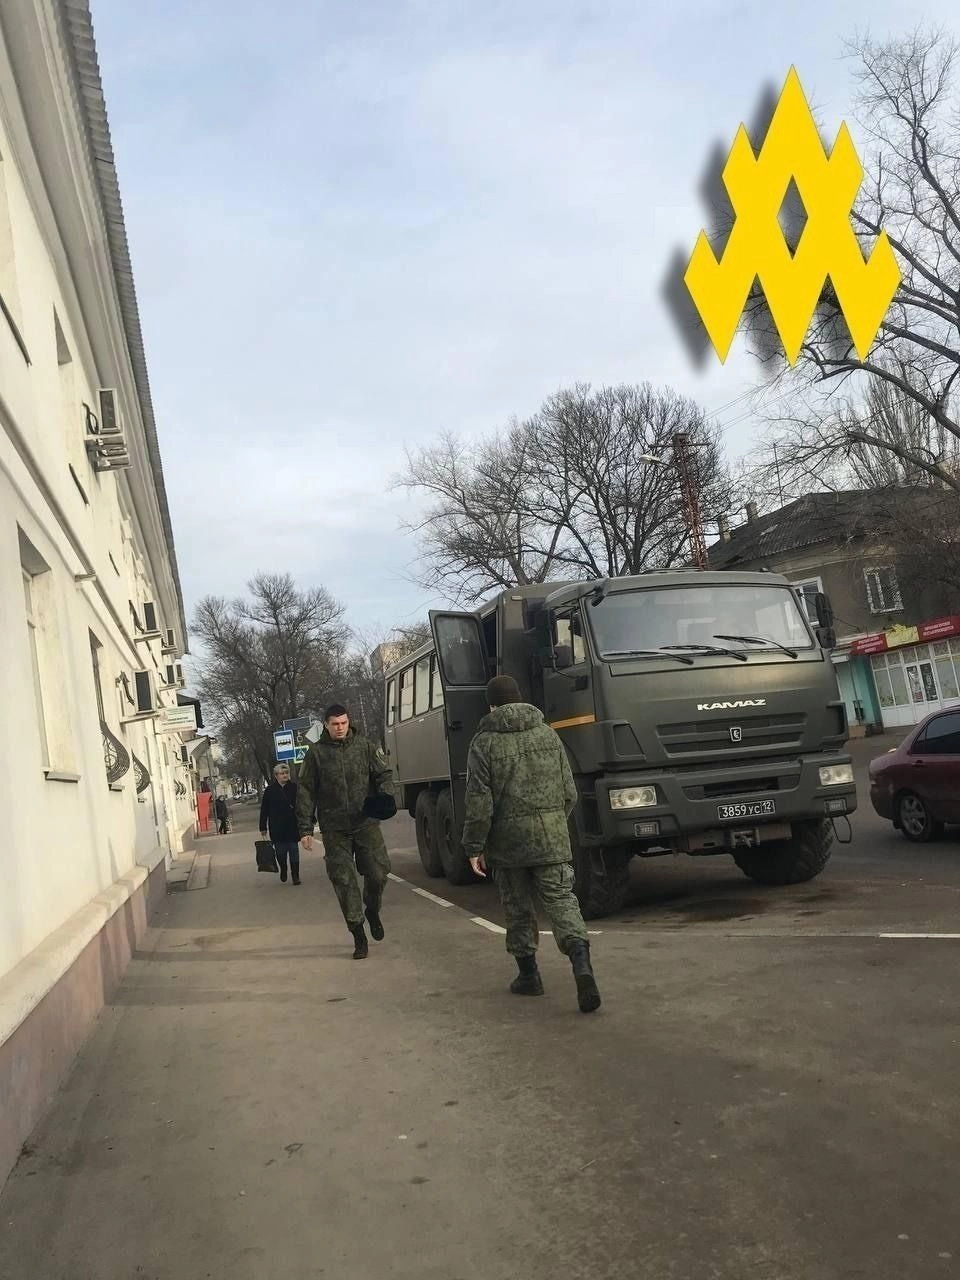 guerrillas-spotted-a-new-group-of-russian-soldiers-arriving-in-occupied-dzhankoy